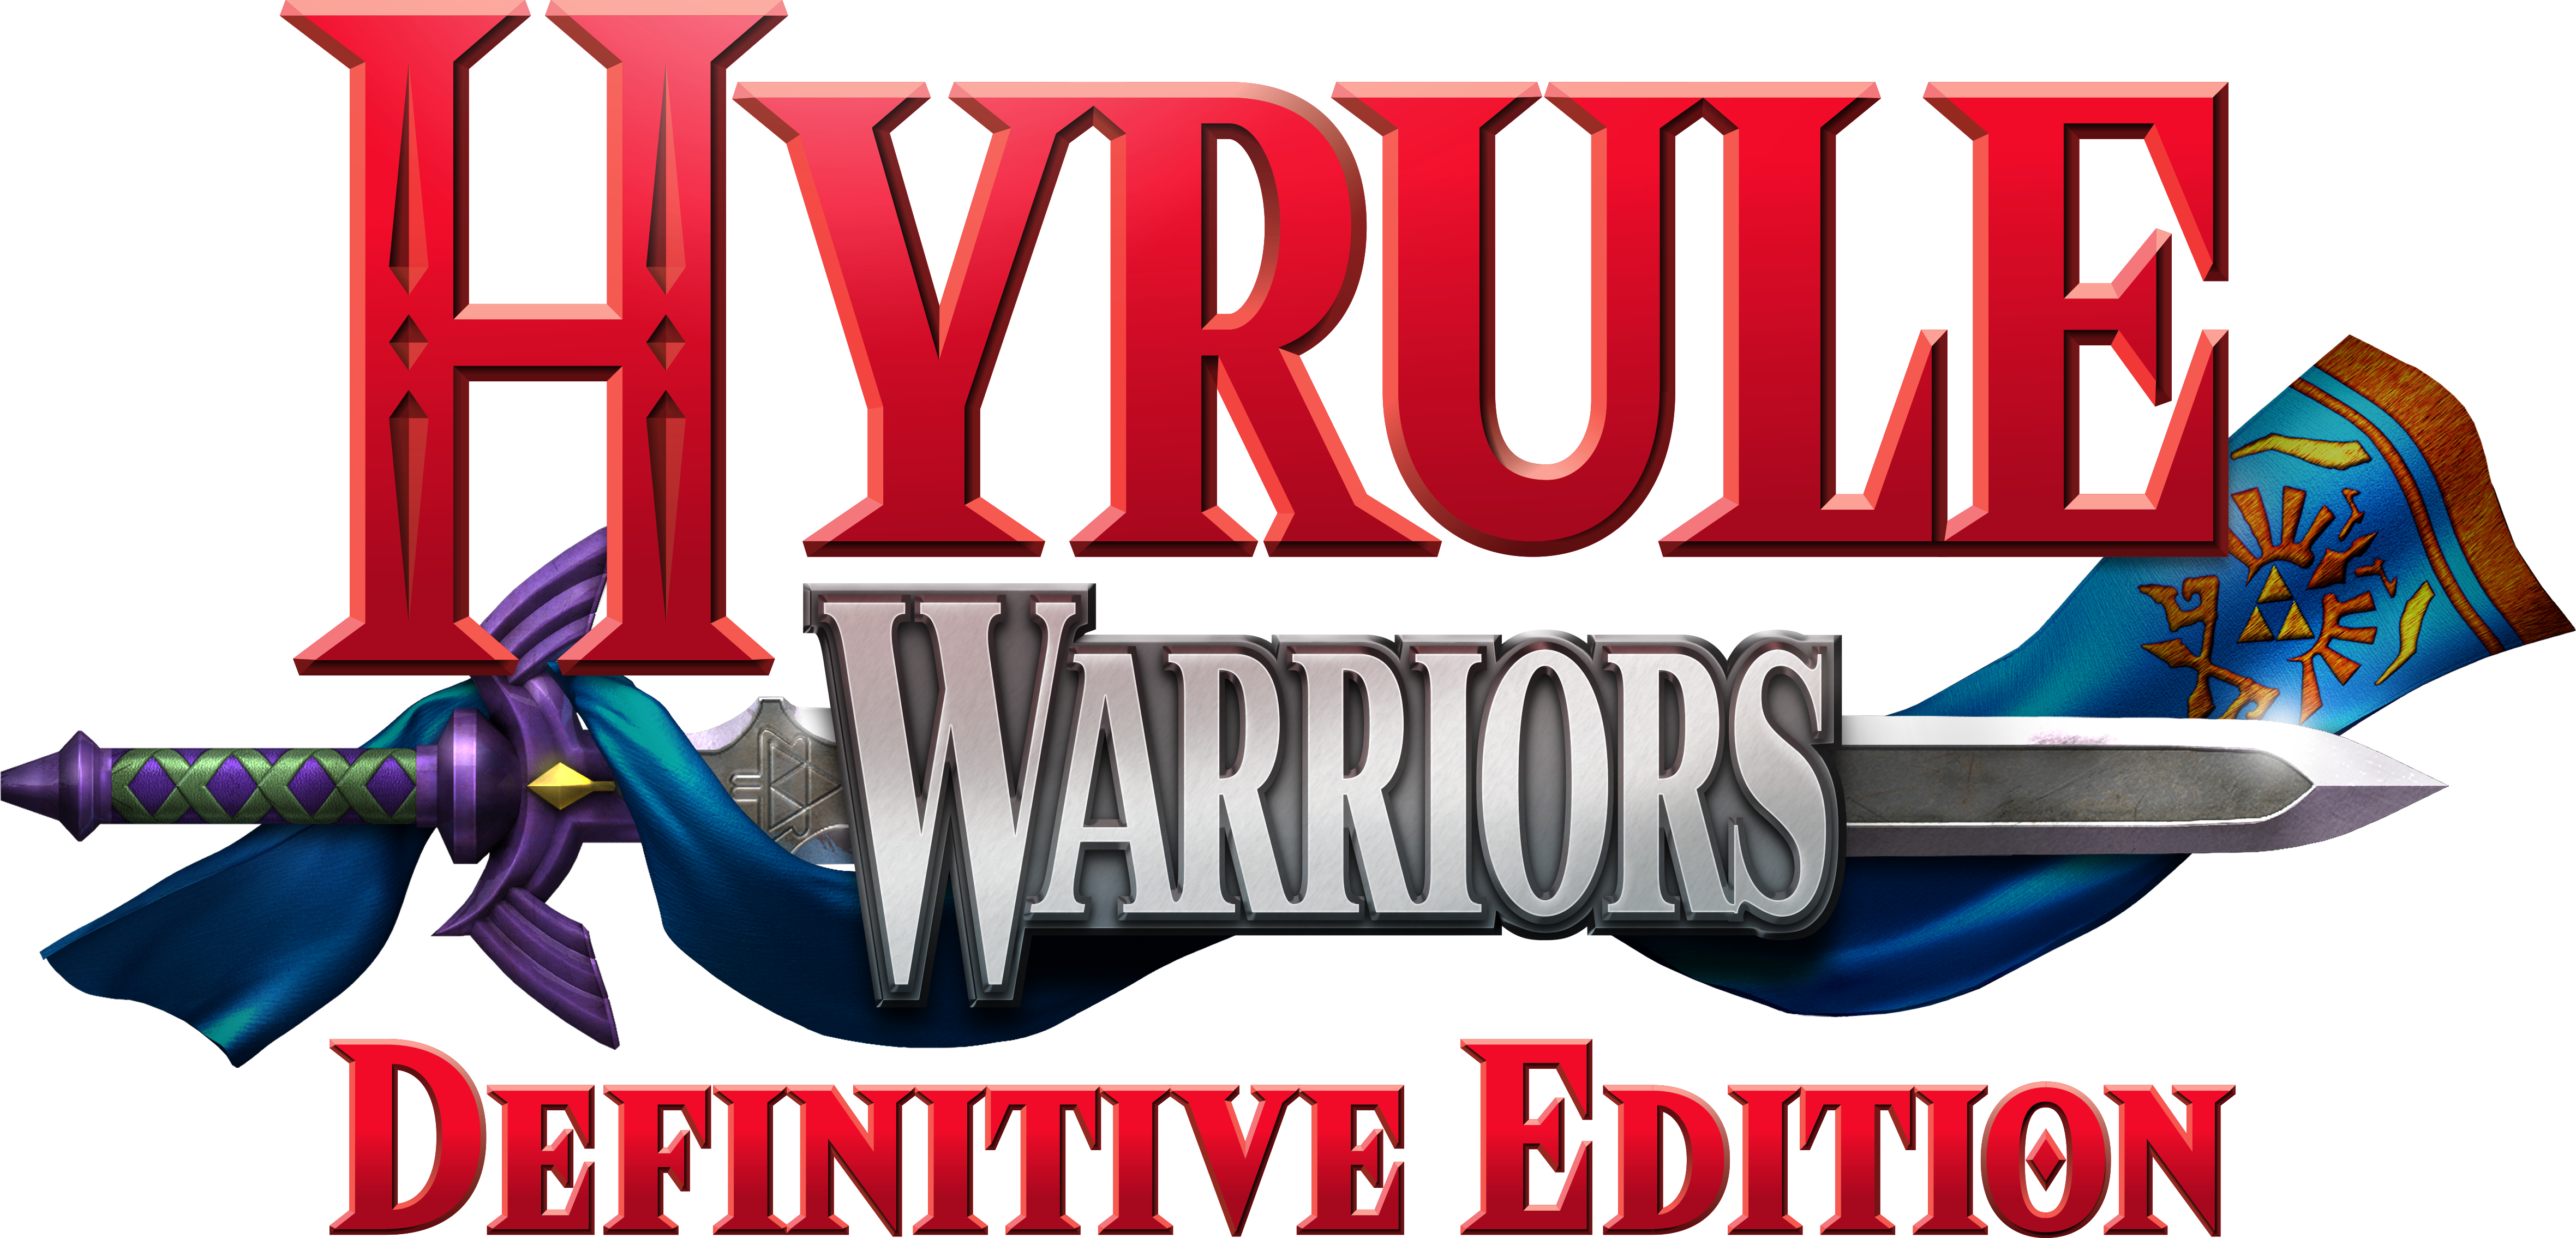 Hyrule Warriors - Definitive Edition - Nintendo Switch for sale online